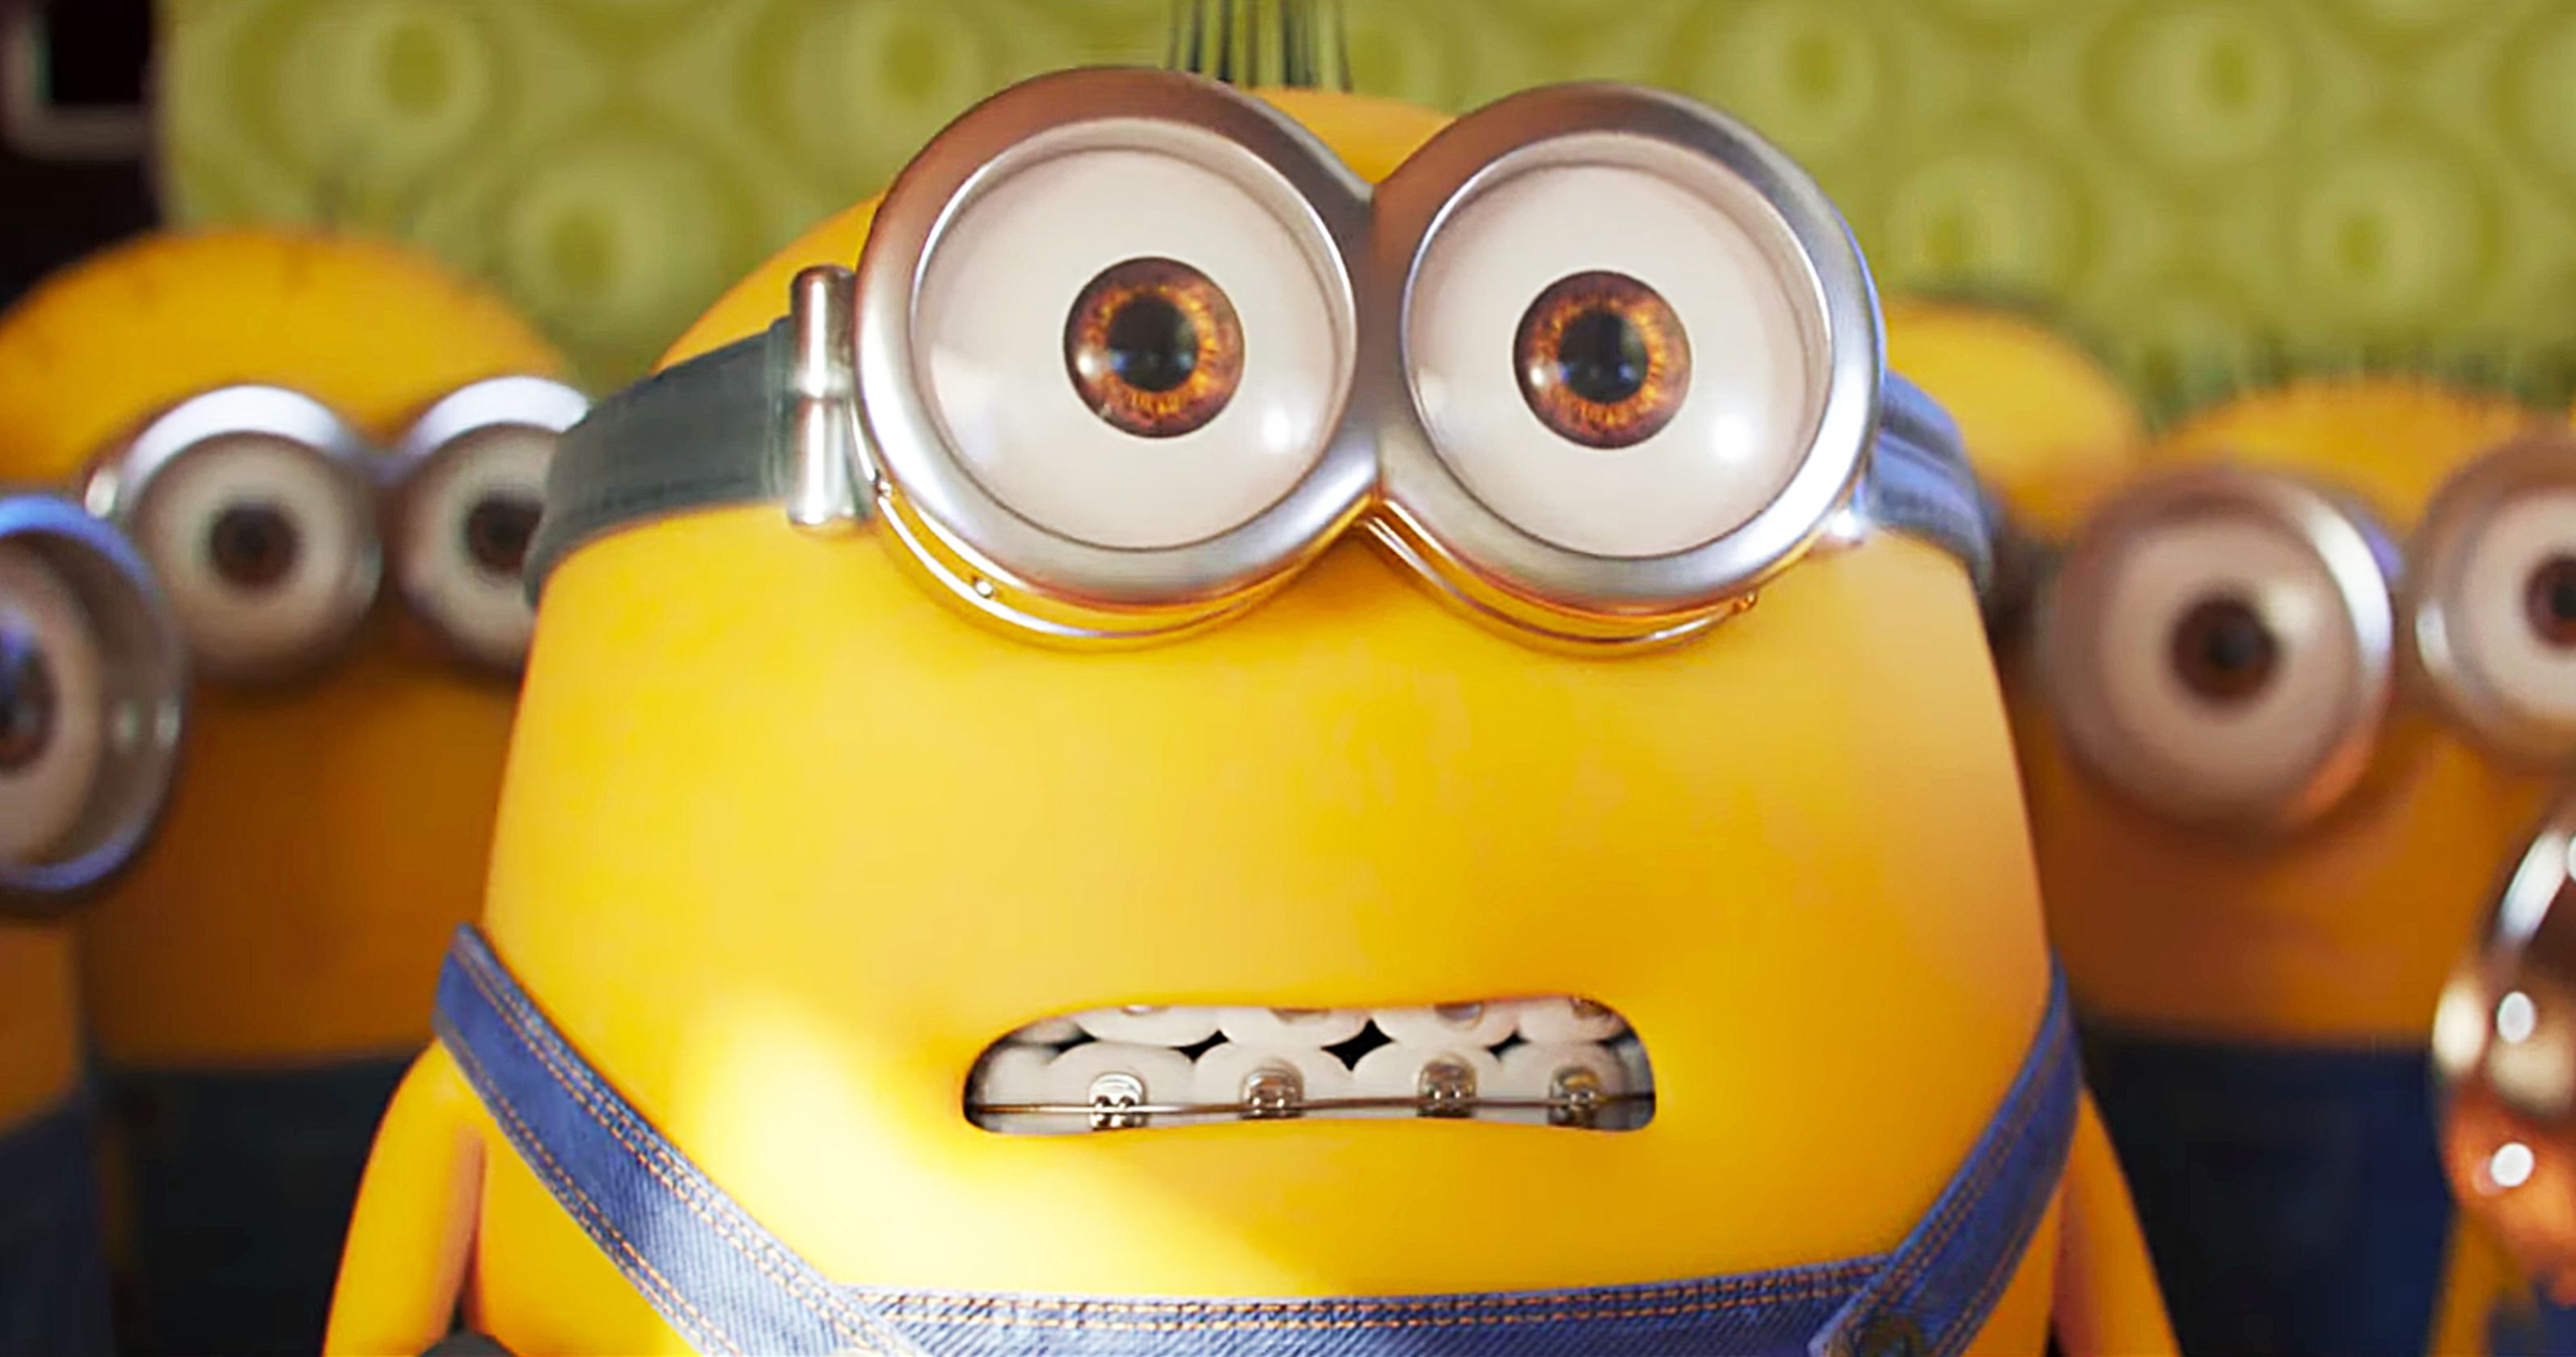 First Minions 2 Trailer Arrives During the Super Bowl and Promises More